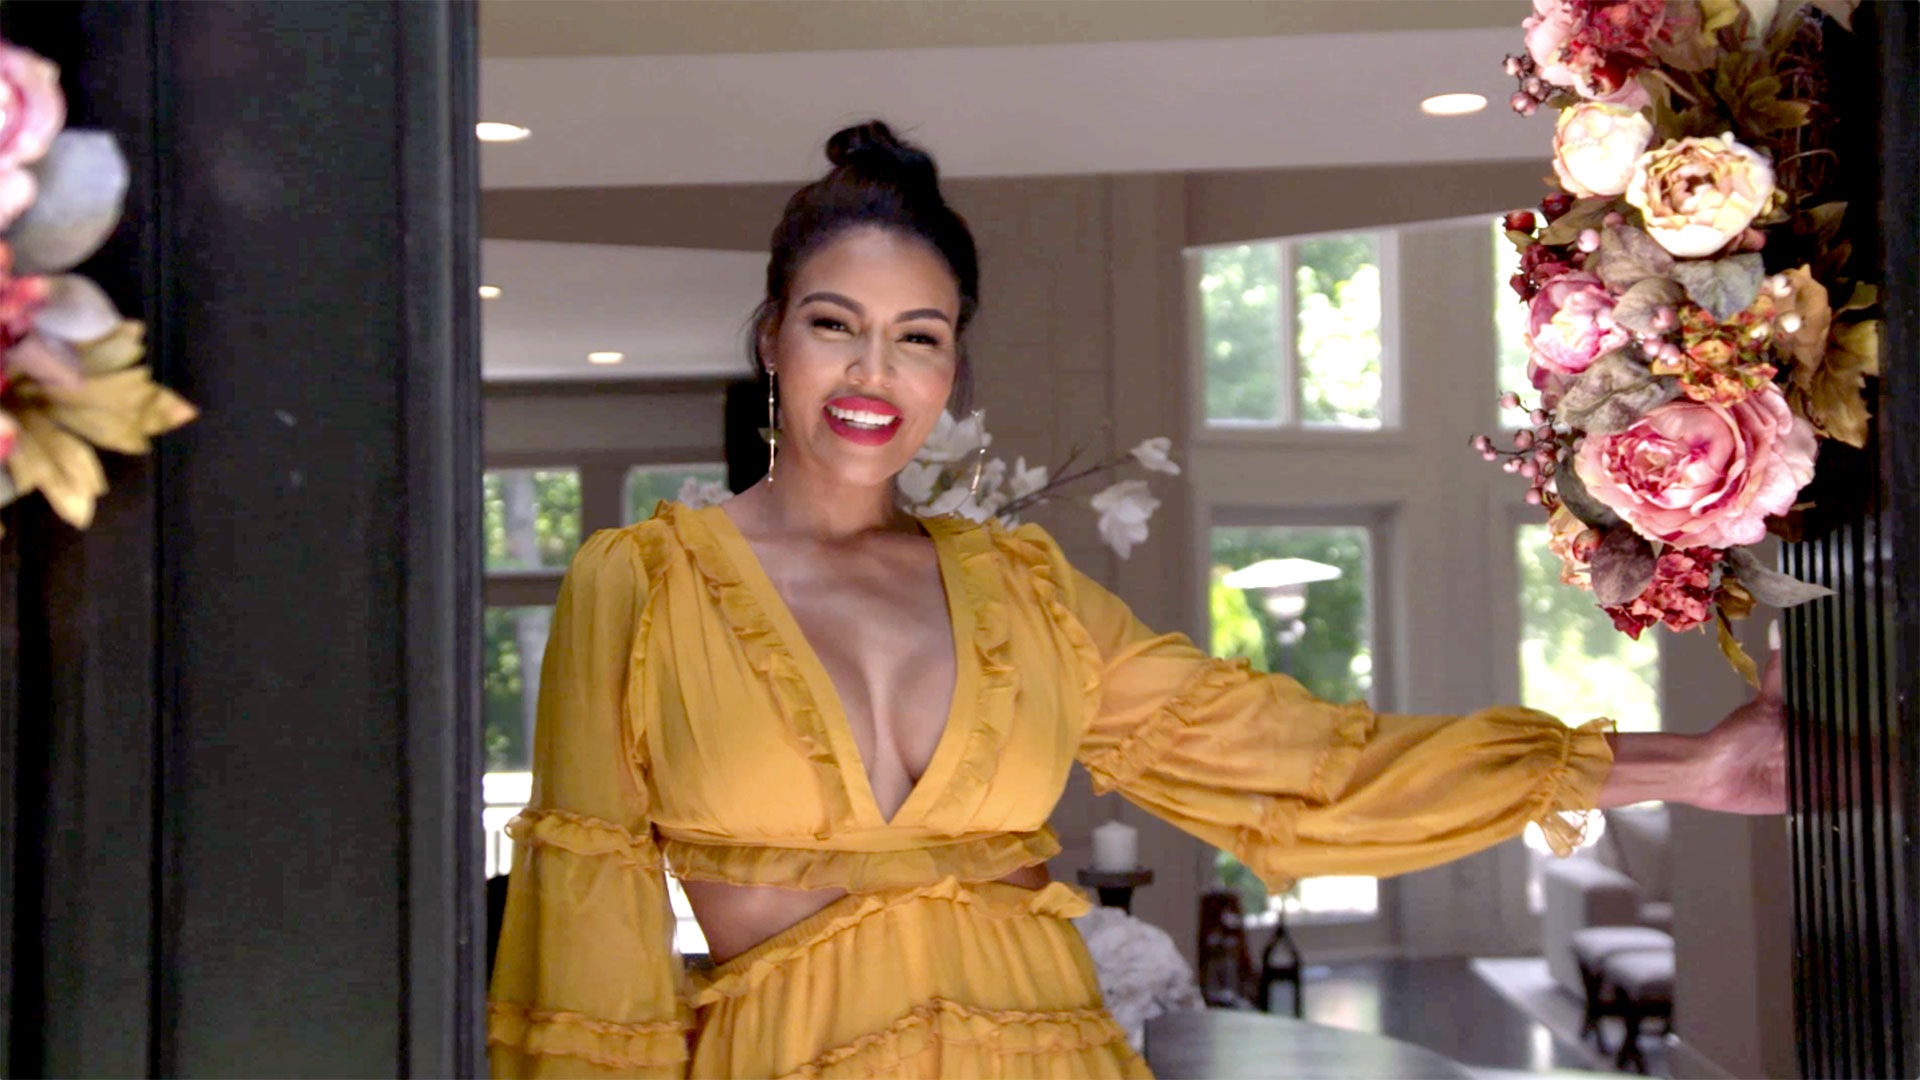 Mia Thornton Shows Inside Her Beautiful New House: "I Absolutely Love It"